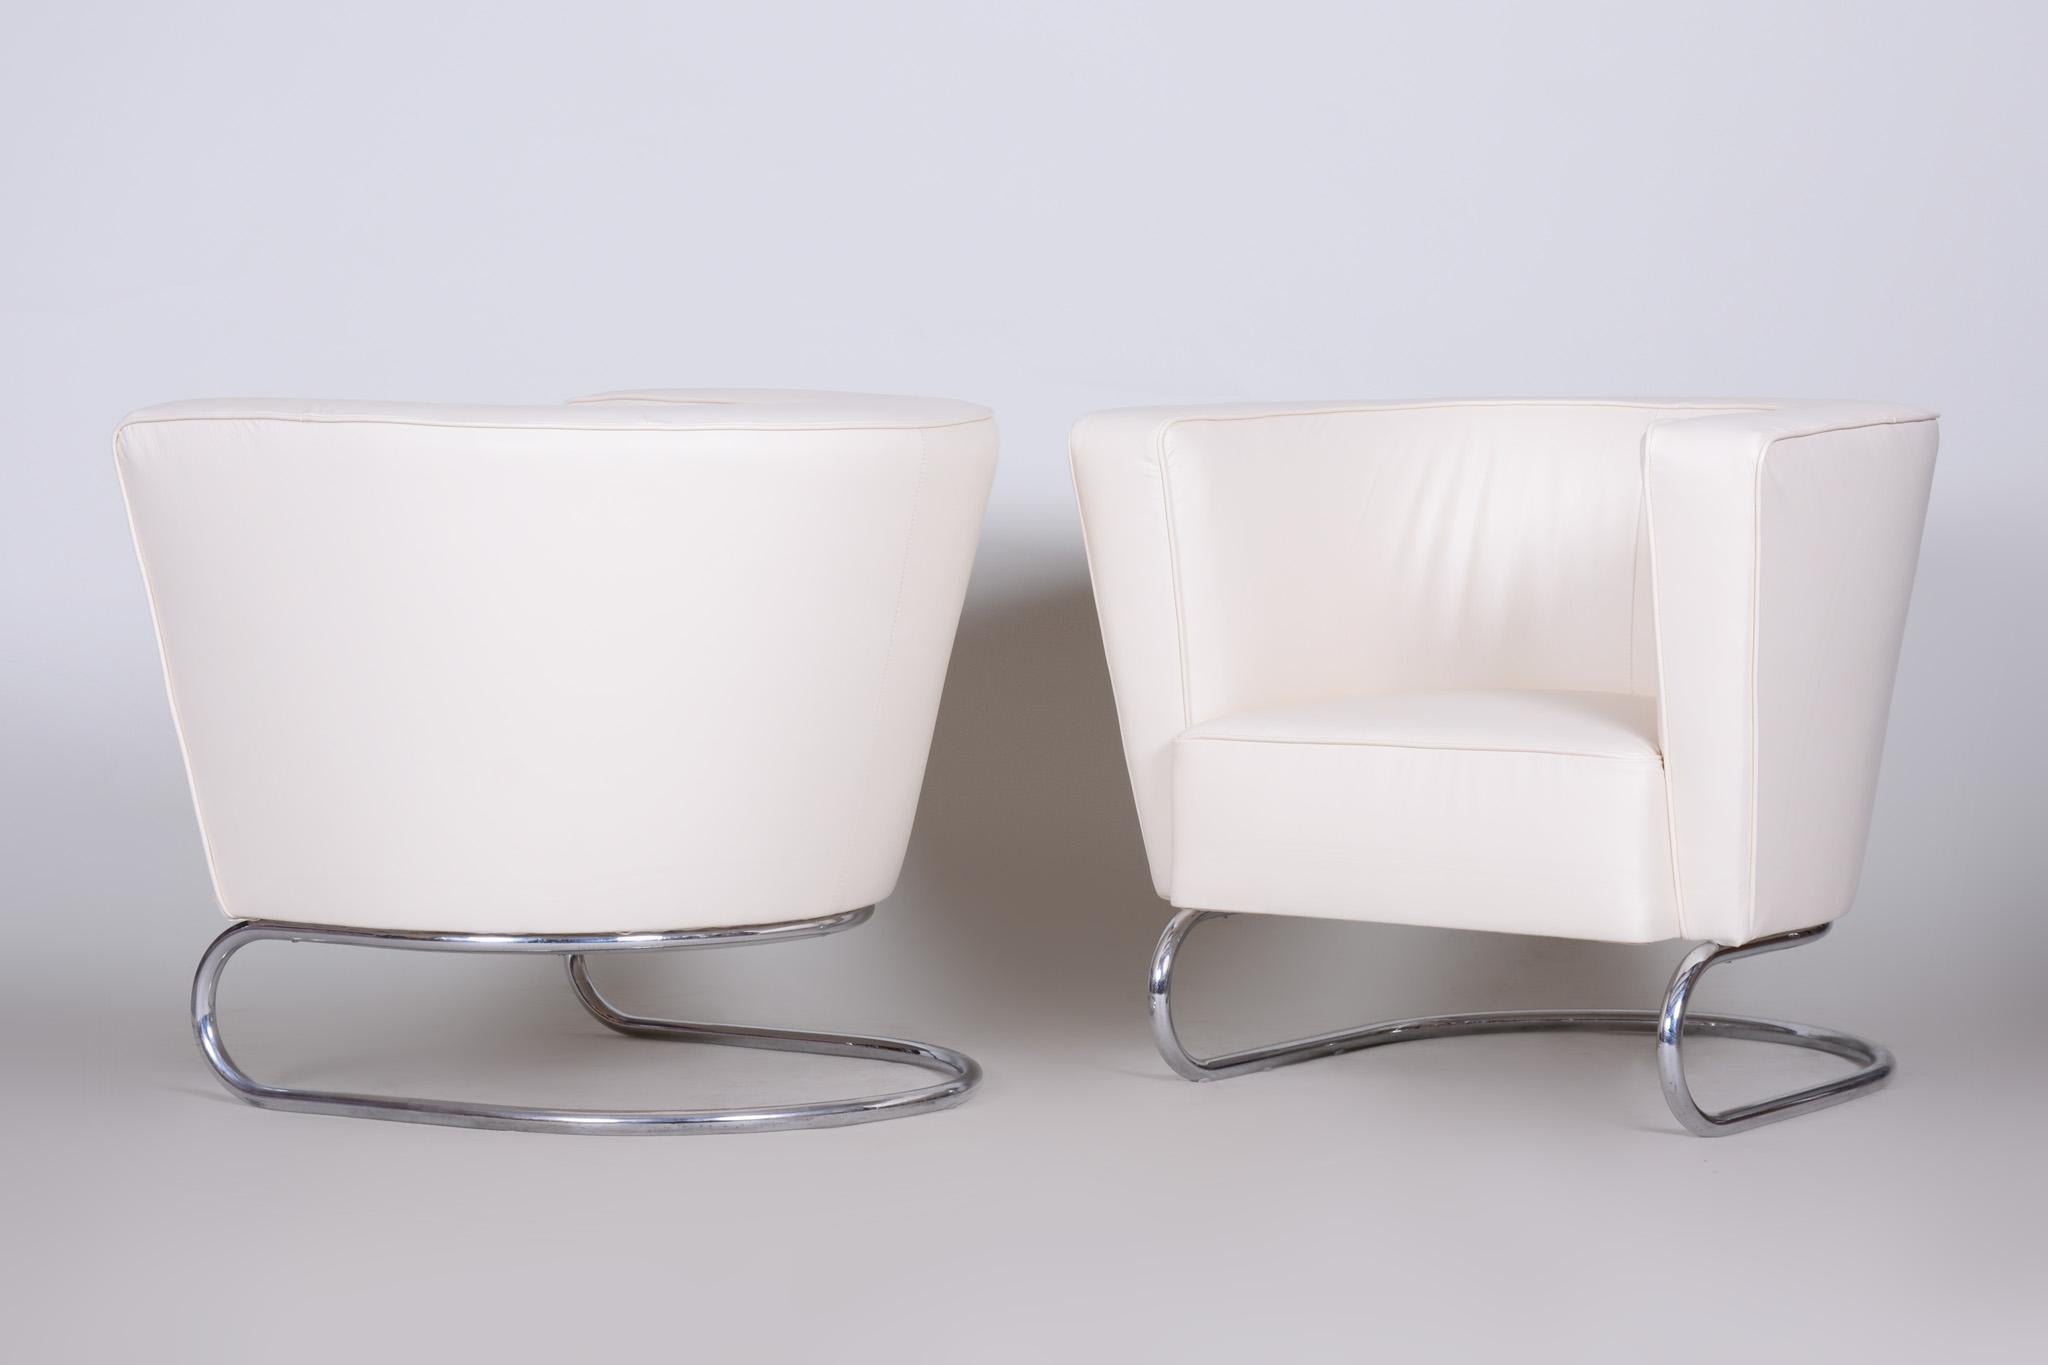 Pair of White Art Deco Armchairs from Czechoslovakia by Jindrich Halabala, 1930s For Sale 8